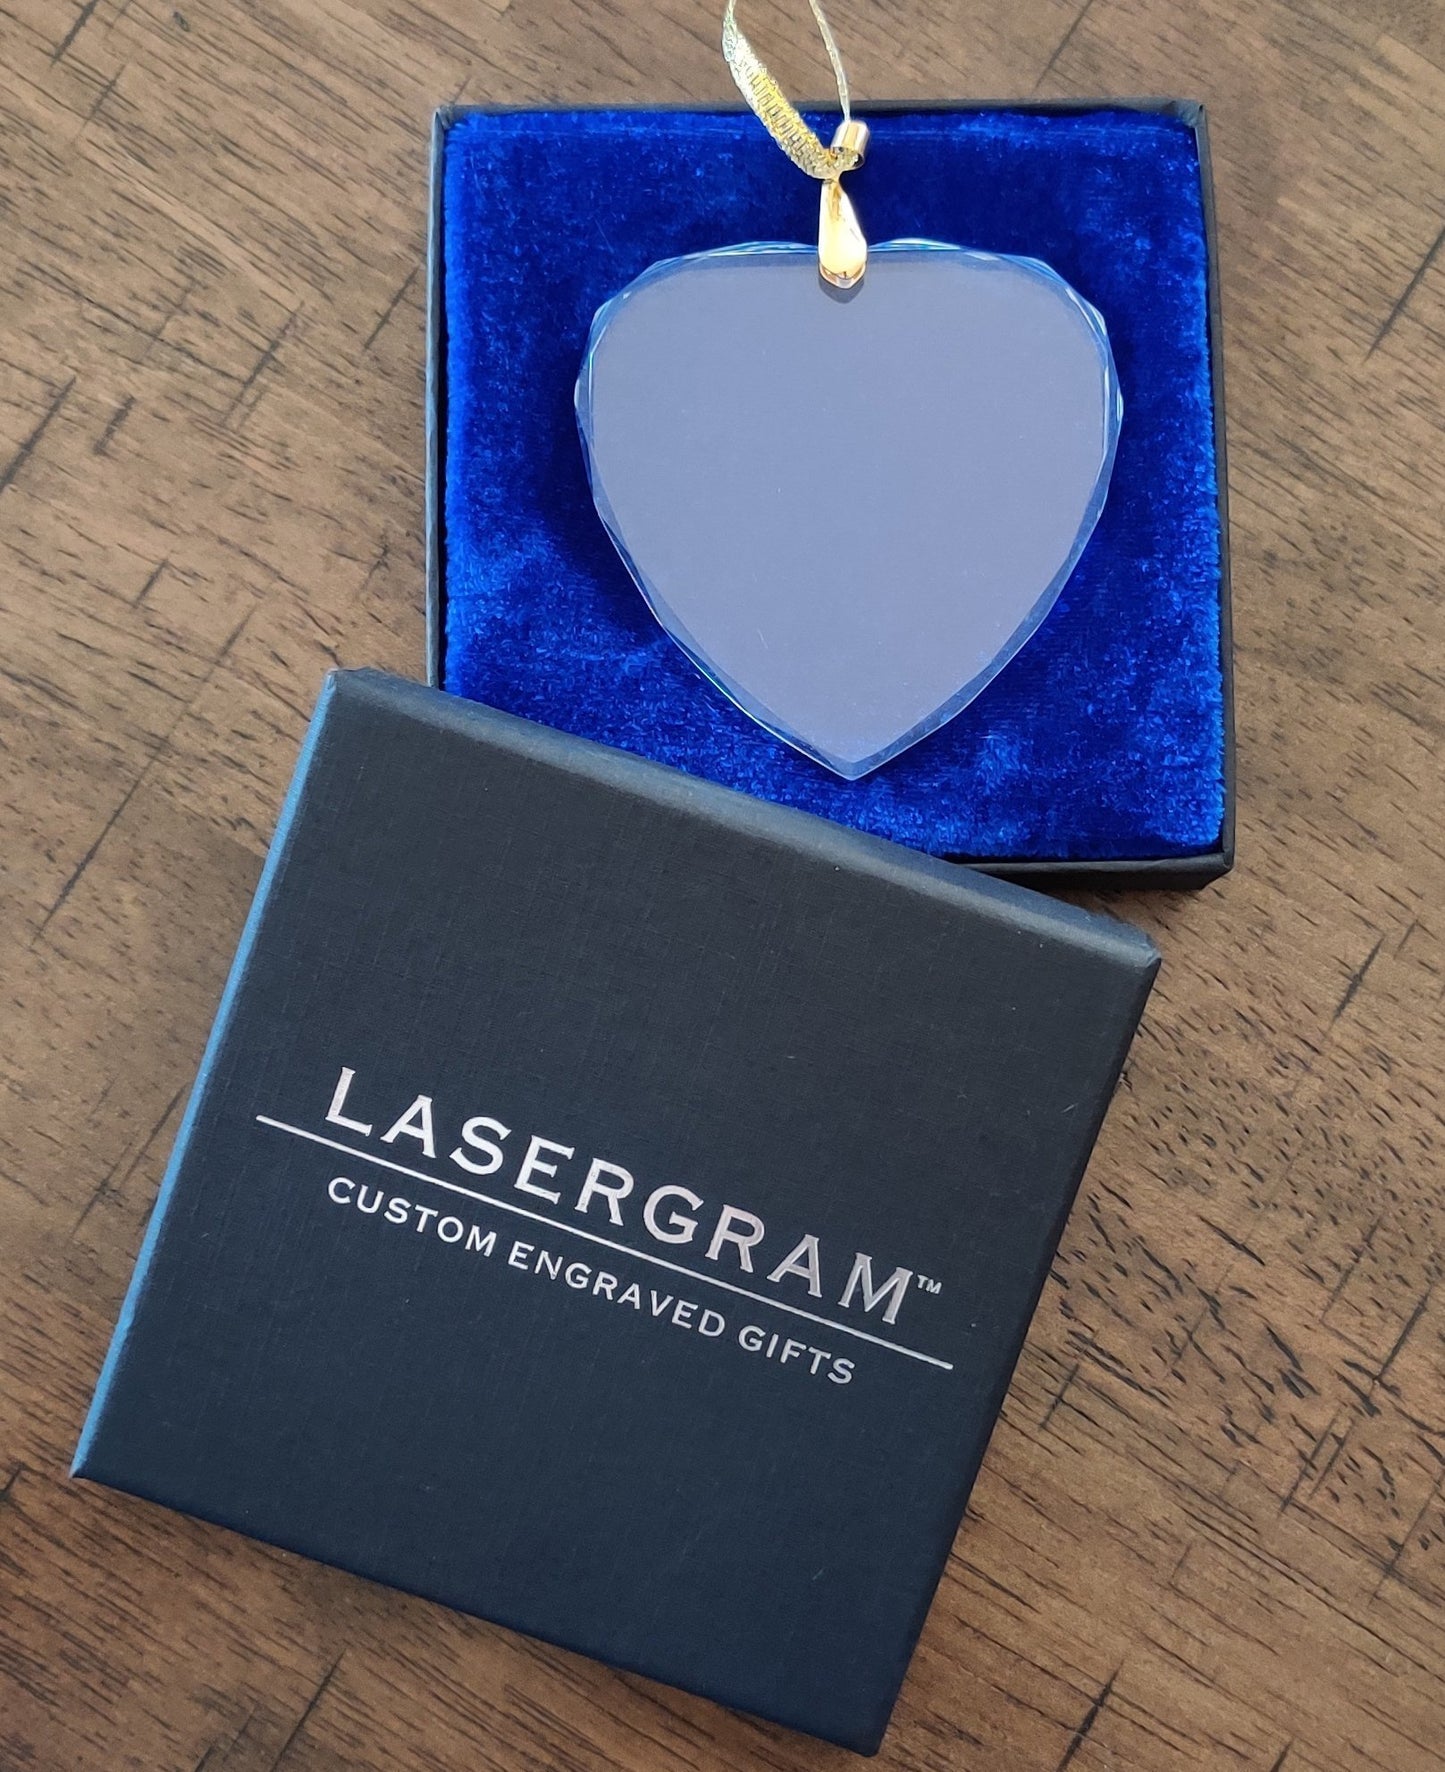 LaserGram Christmas Ornament, Palm Trees, Personalized Engraving Included (Heart Shape)